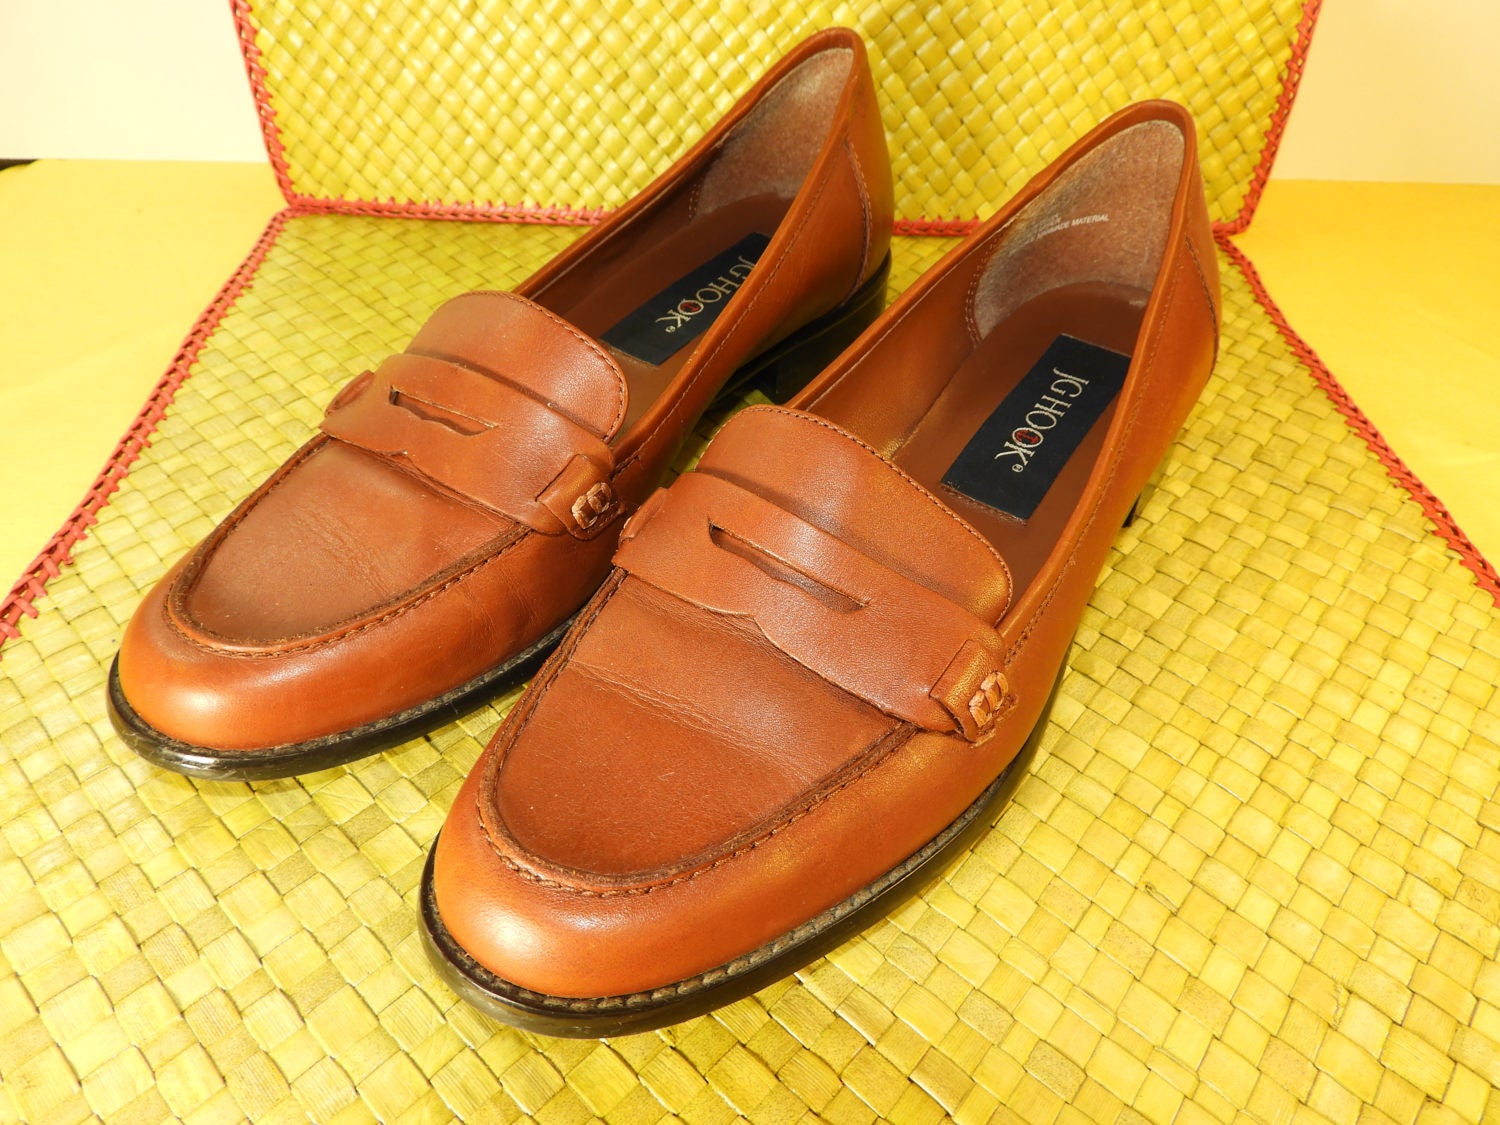 Vintage Penny Loafers JG Hook Shoes Size 9M, Womens Shoes Leather Upper ...